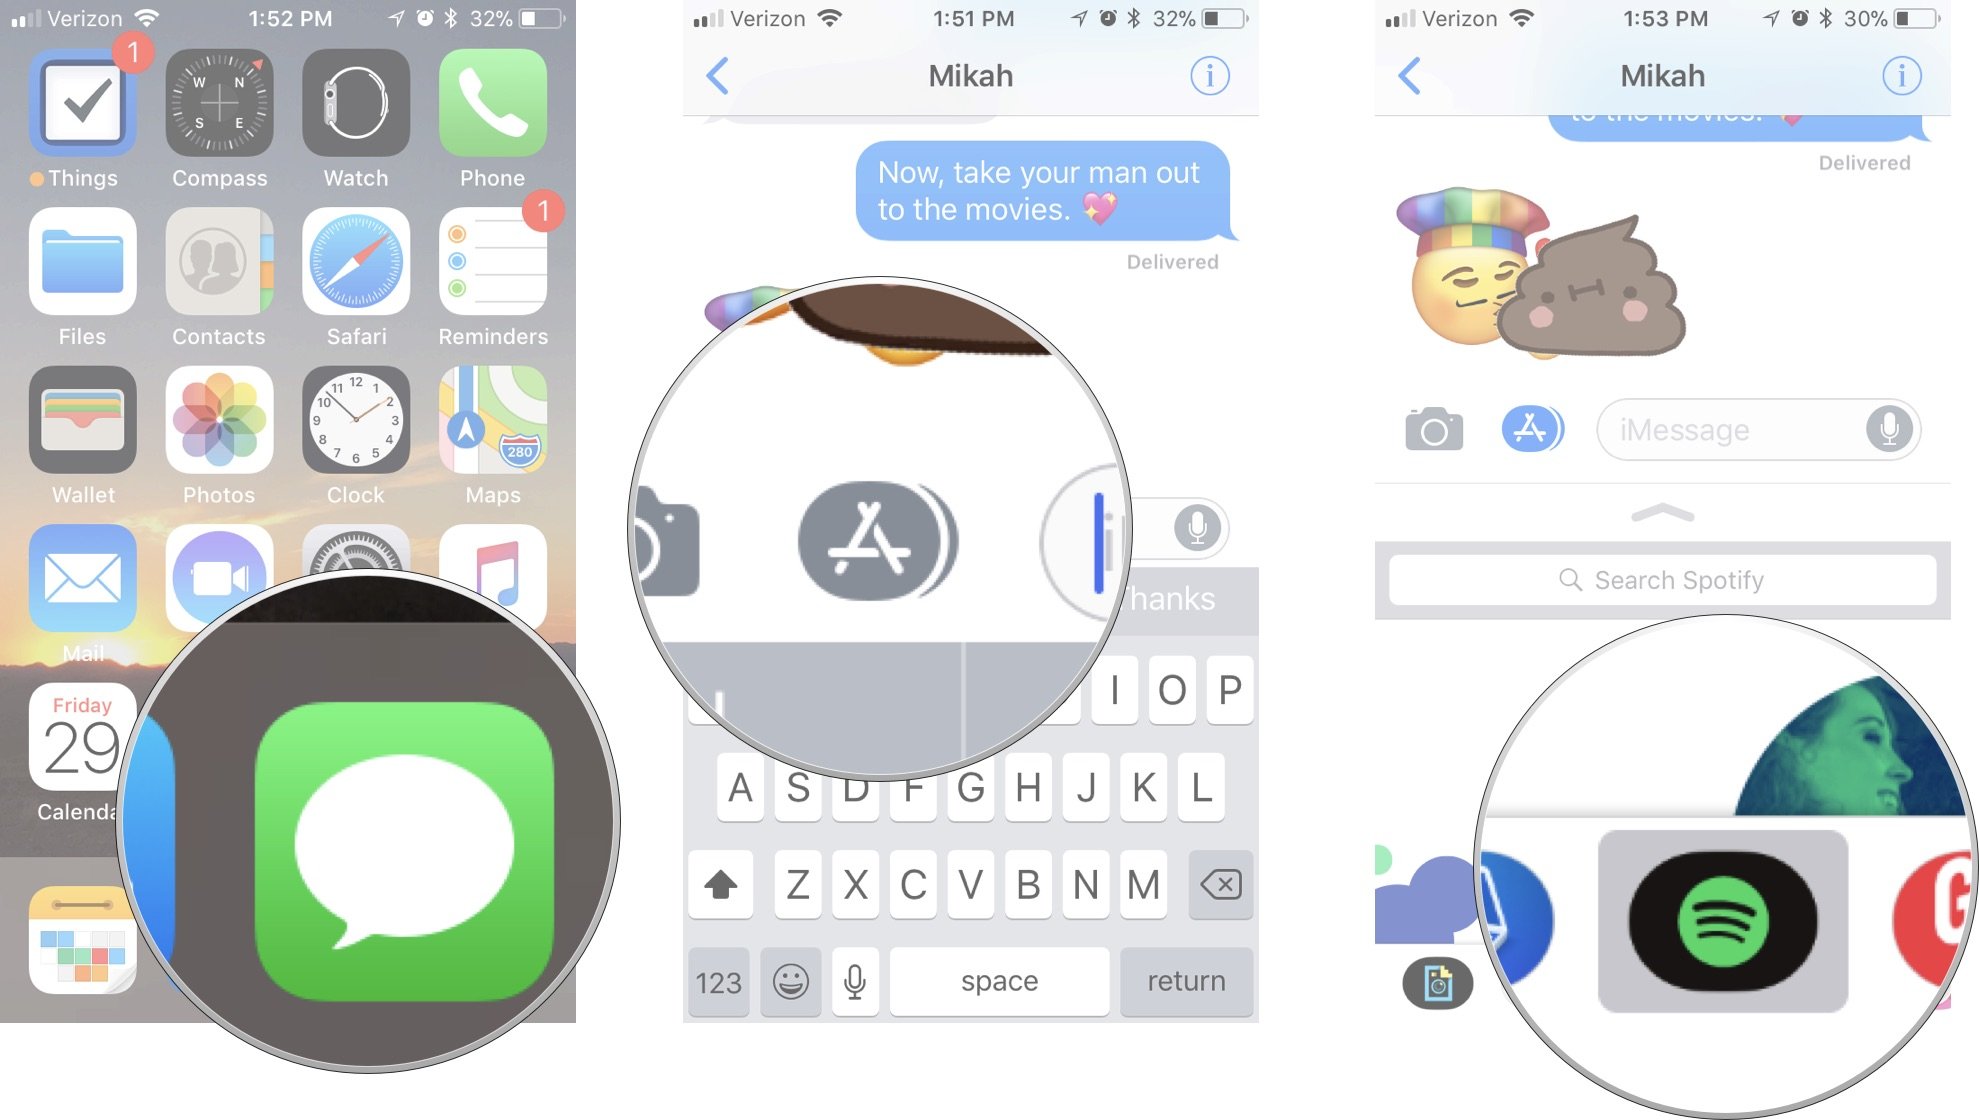 See more sticker options showing how to Open Messages, tap the App Tray, and tap on a sticker pack you want to access